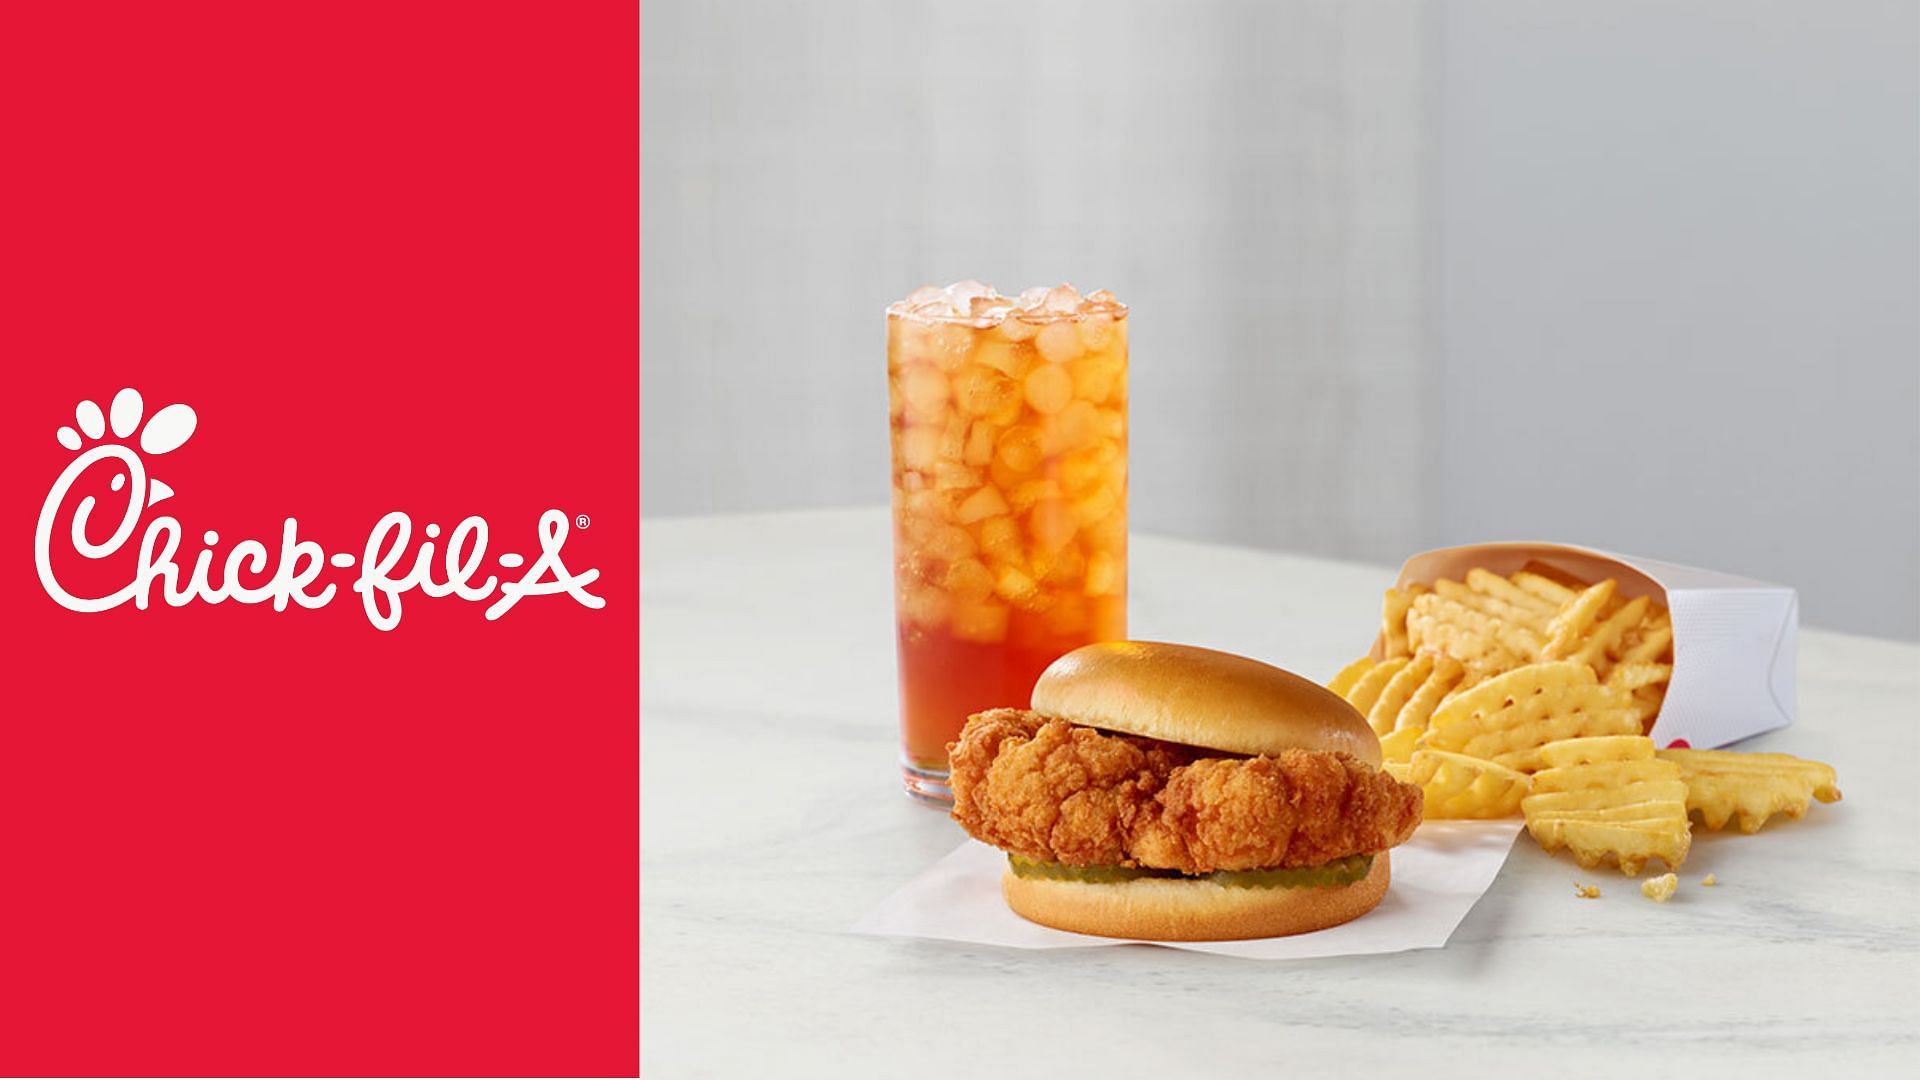 Chick Fil A introduces a new Cauliflower sandwich priced at $6.59 (Image via Chick Fil A)